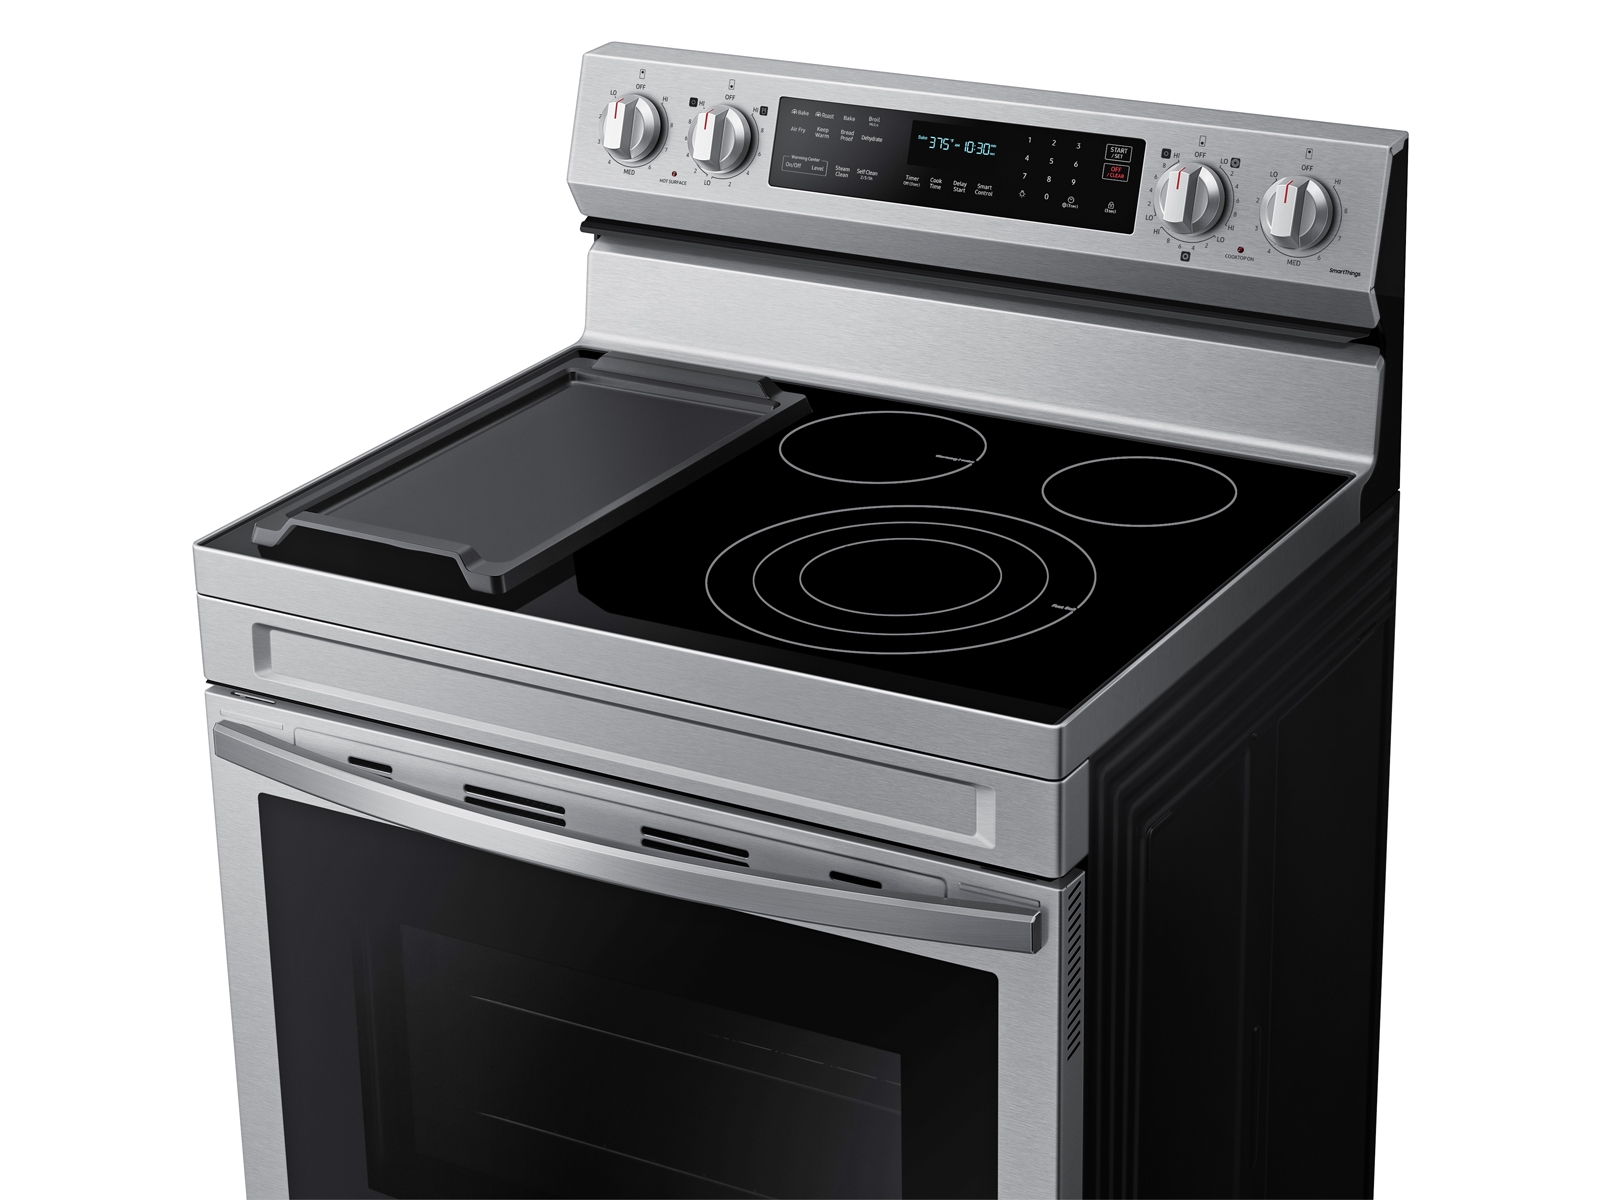 NE63A6711SG Samsung 6.3 cu. ft. Smart Freestanding Electric Range with  No-Preheat Air Fry, Convection+ & Griddle in Black Stainless Steel